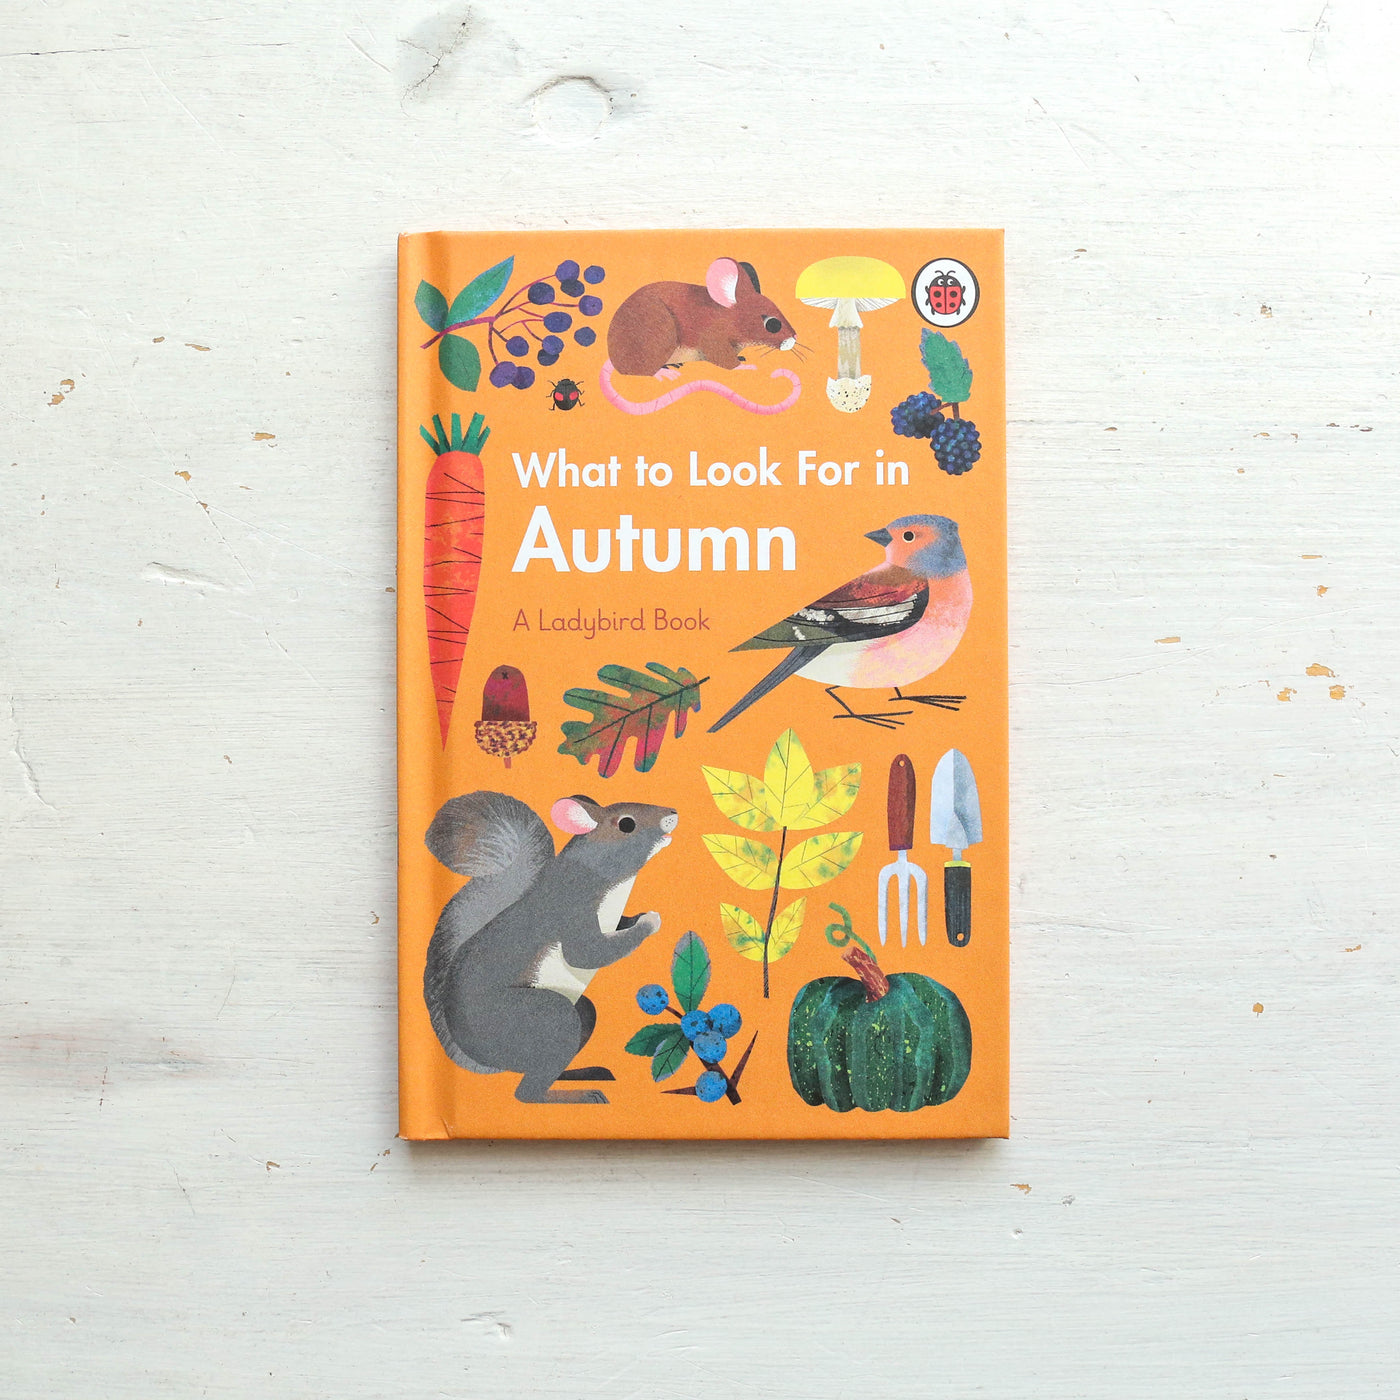 What to Look For in Autumn - A Ladybird Book